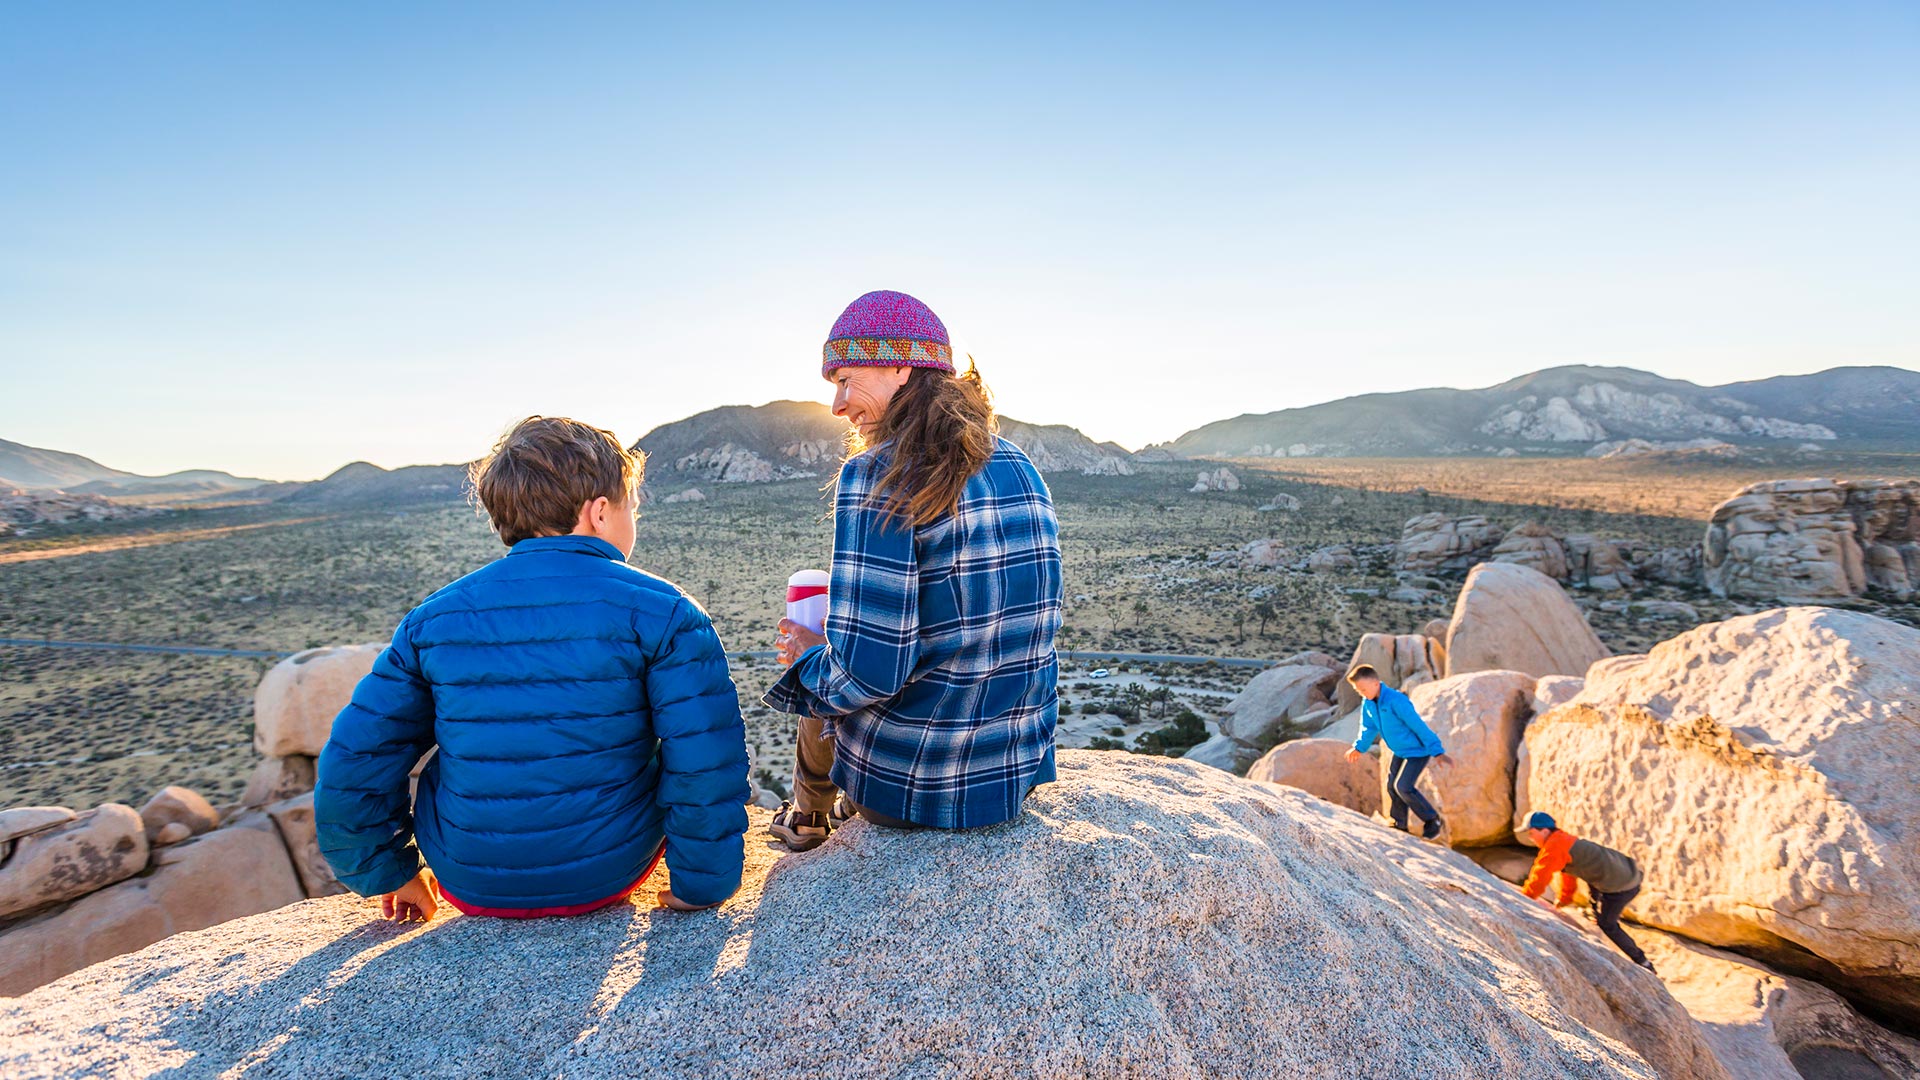 mother and children on rock overlooking joshua tree national park